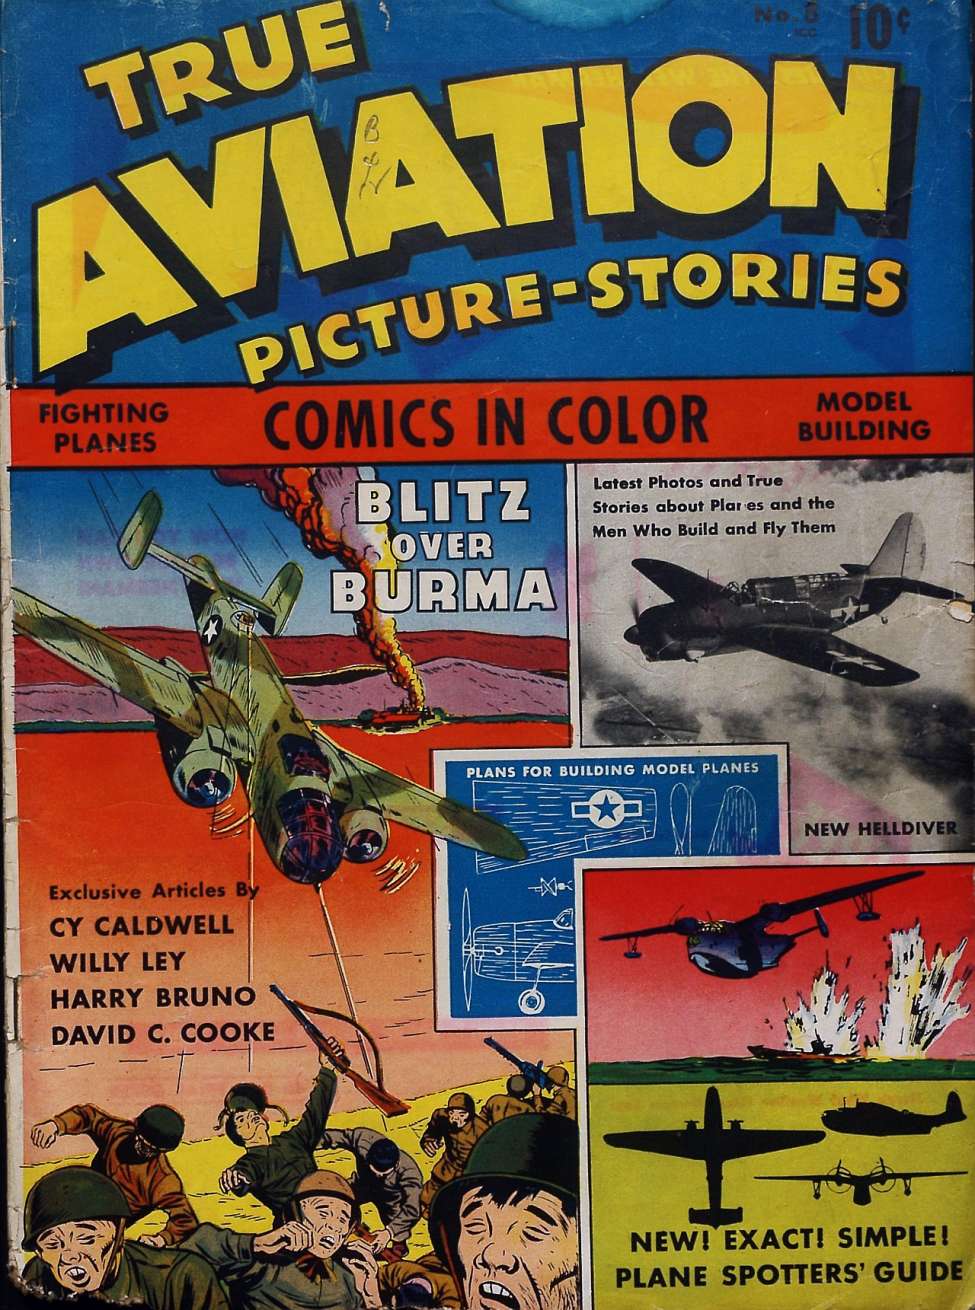 Book Cover For True Aviation Picture Stories 8